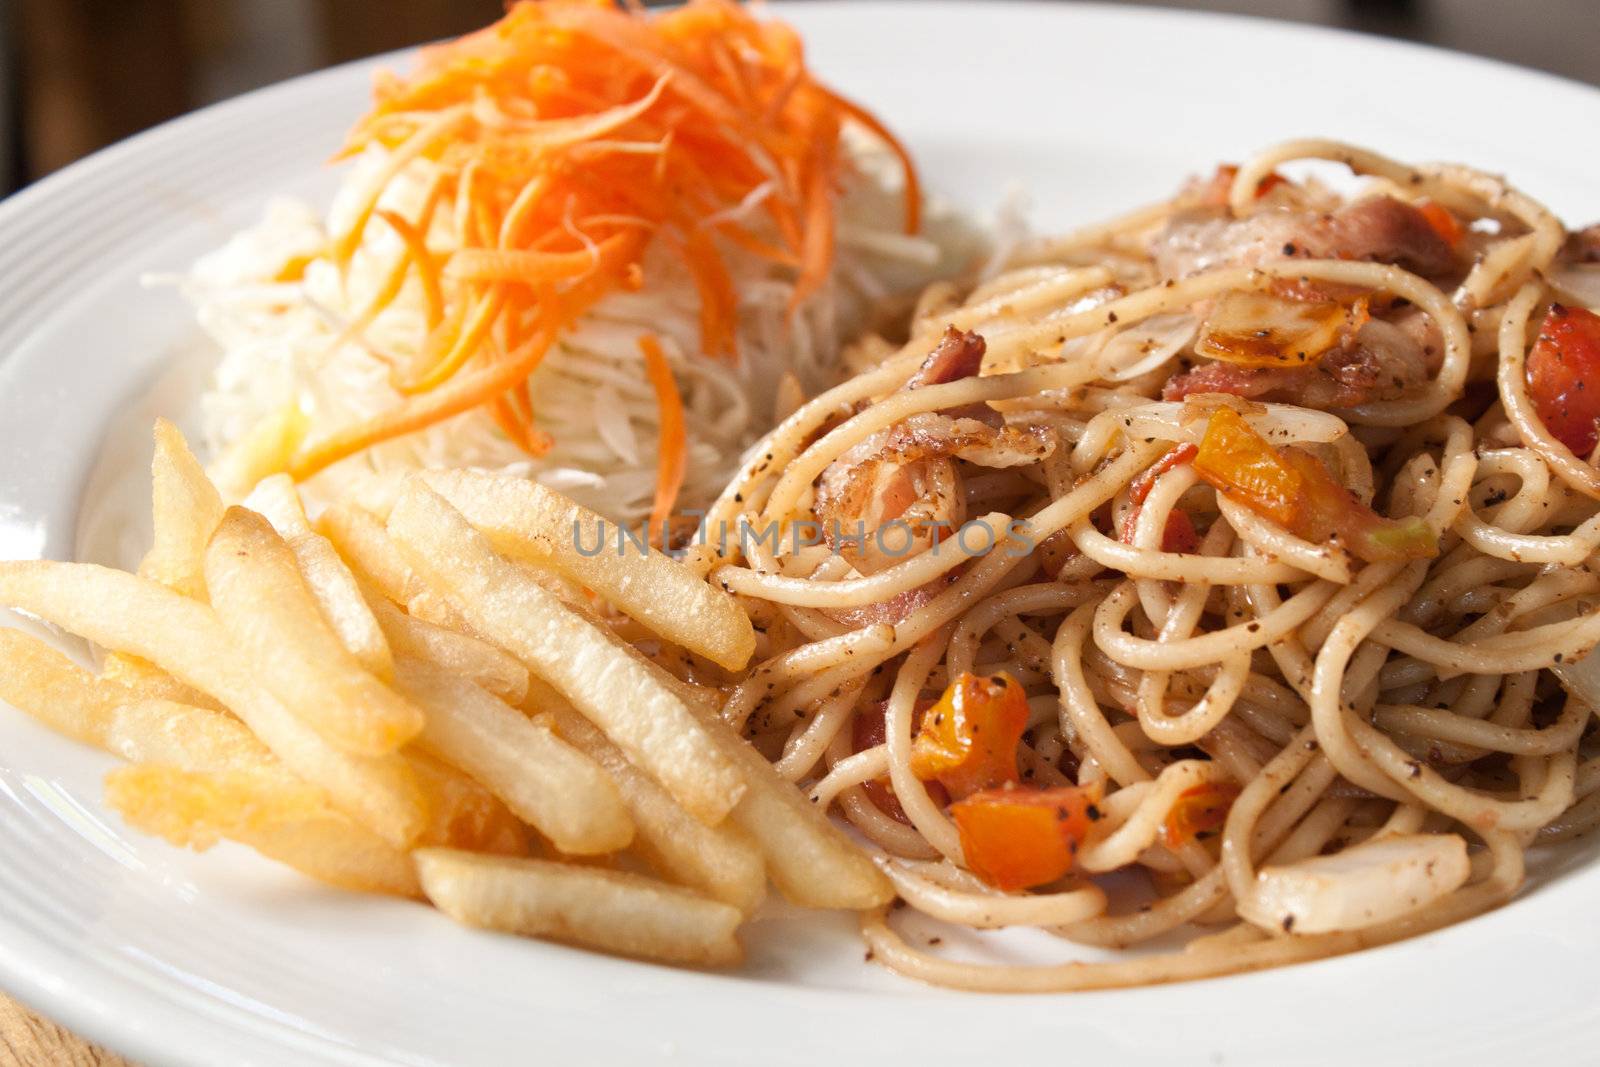 Black pepper and bacon spaghetti in plate with french fries and vegetable salad, shallow depth of field